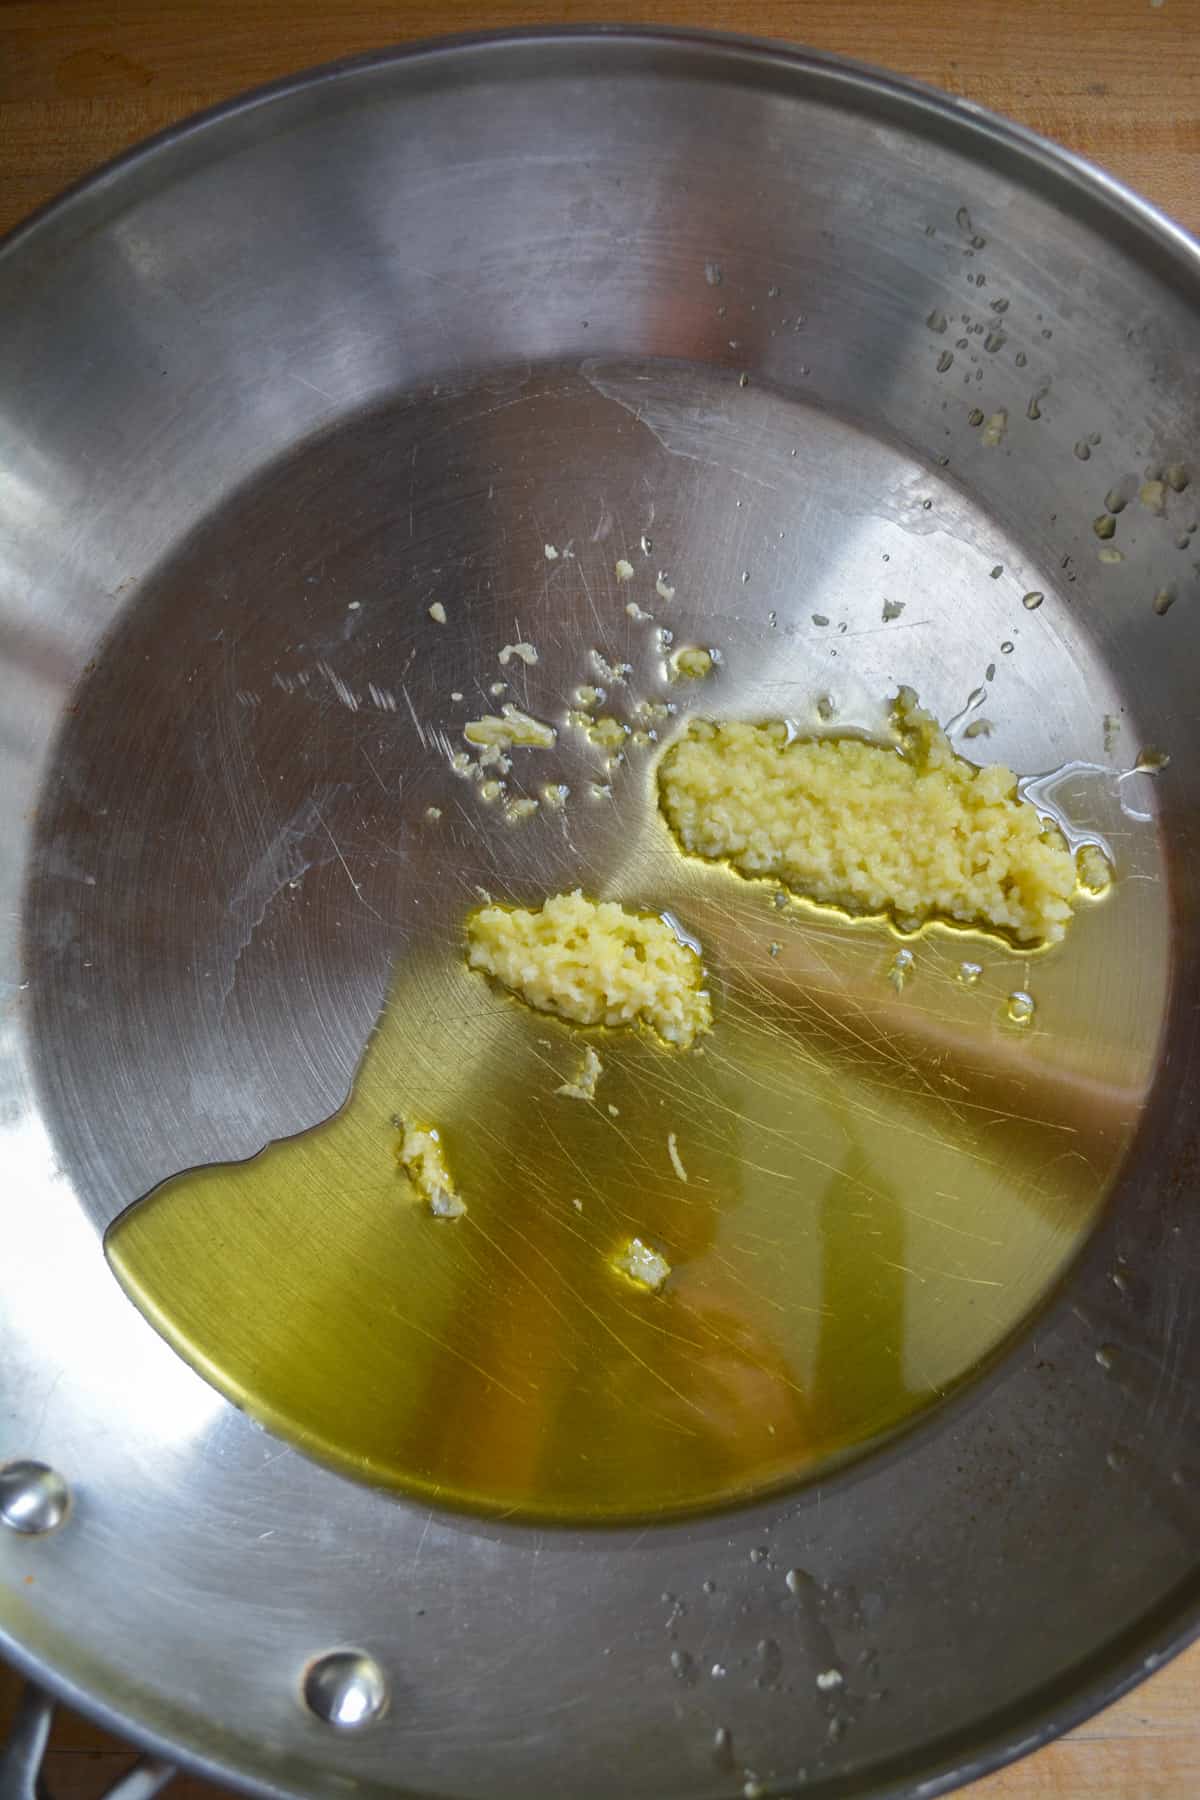 Olive oil and garlic in a stainless steel skillet.